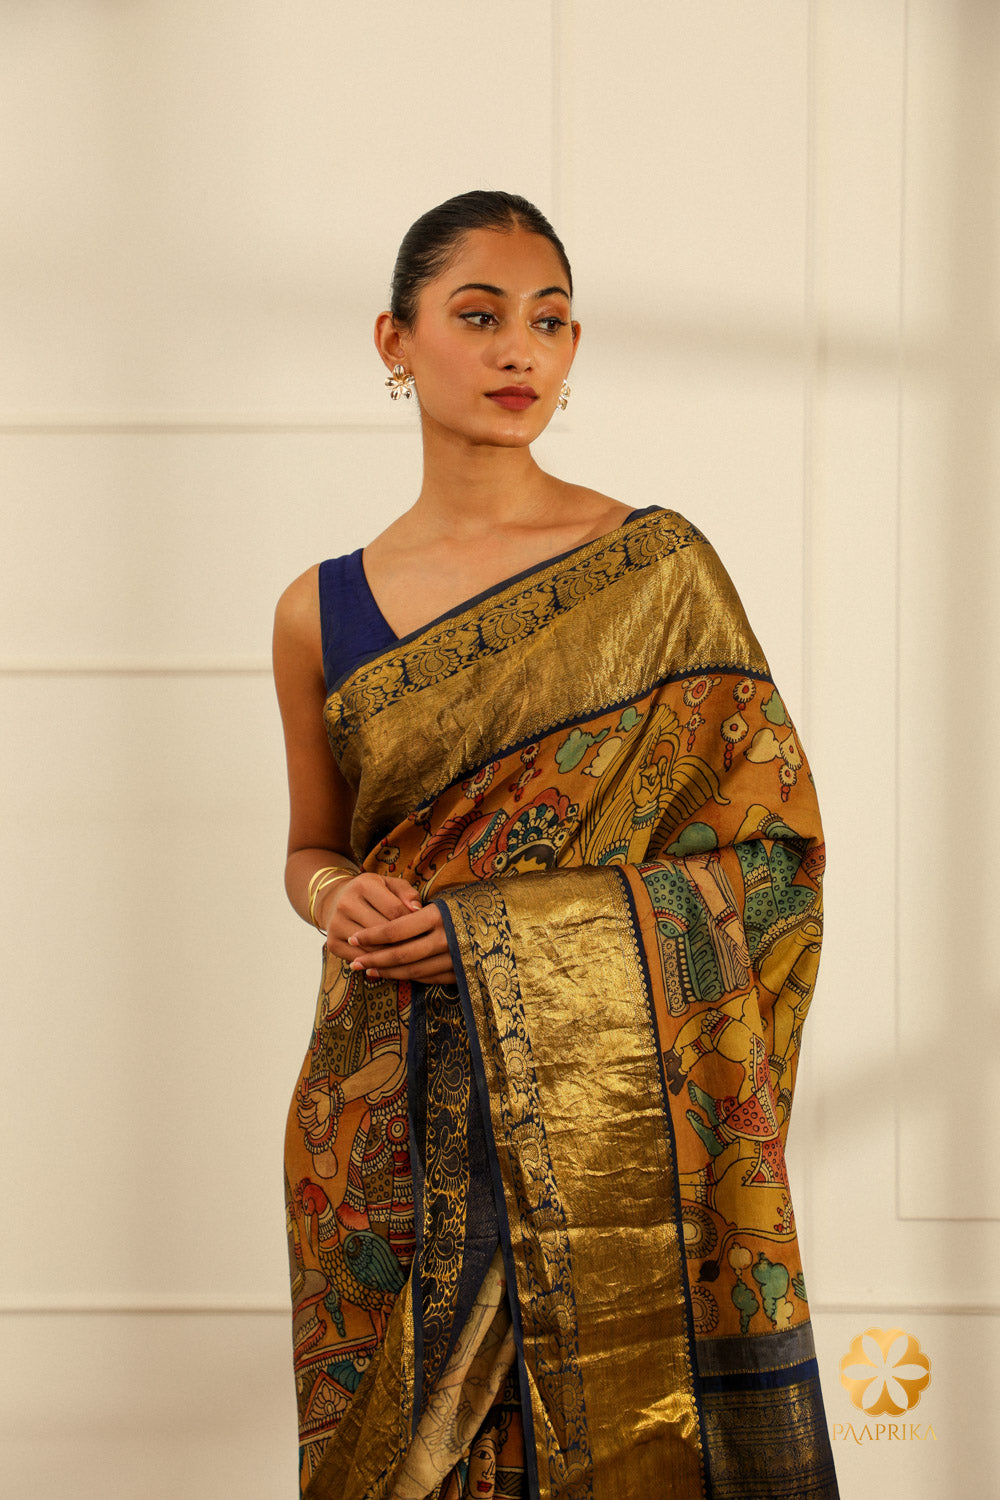 The saree elegantly displayed on a mannequin, capturing the beauty of the Kalamkari design and the peacock motifs on the border.